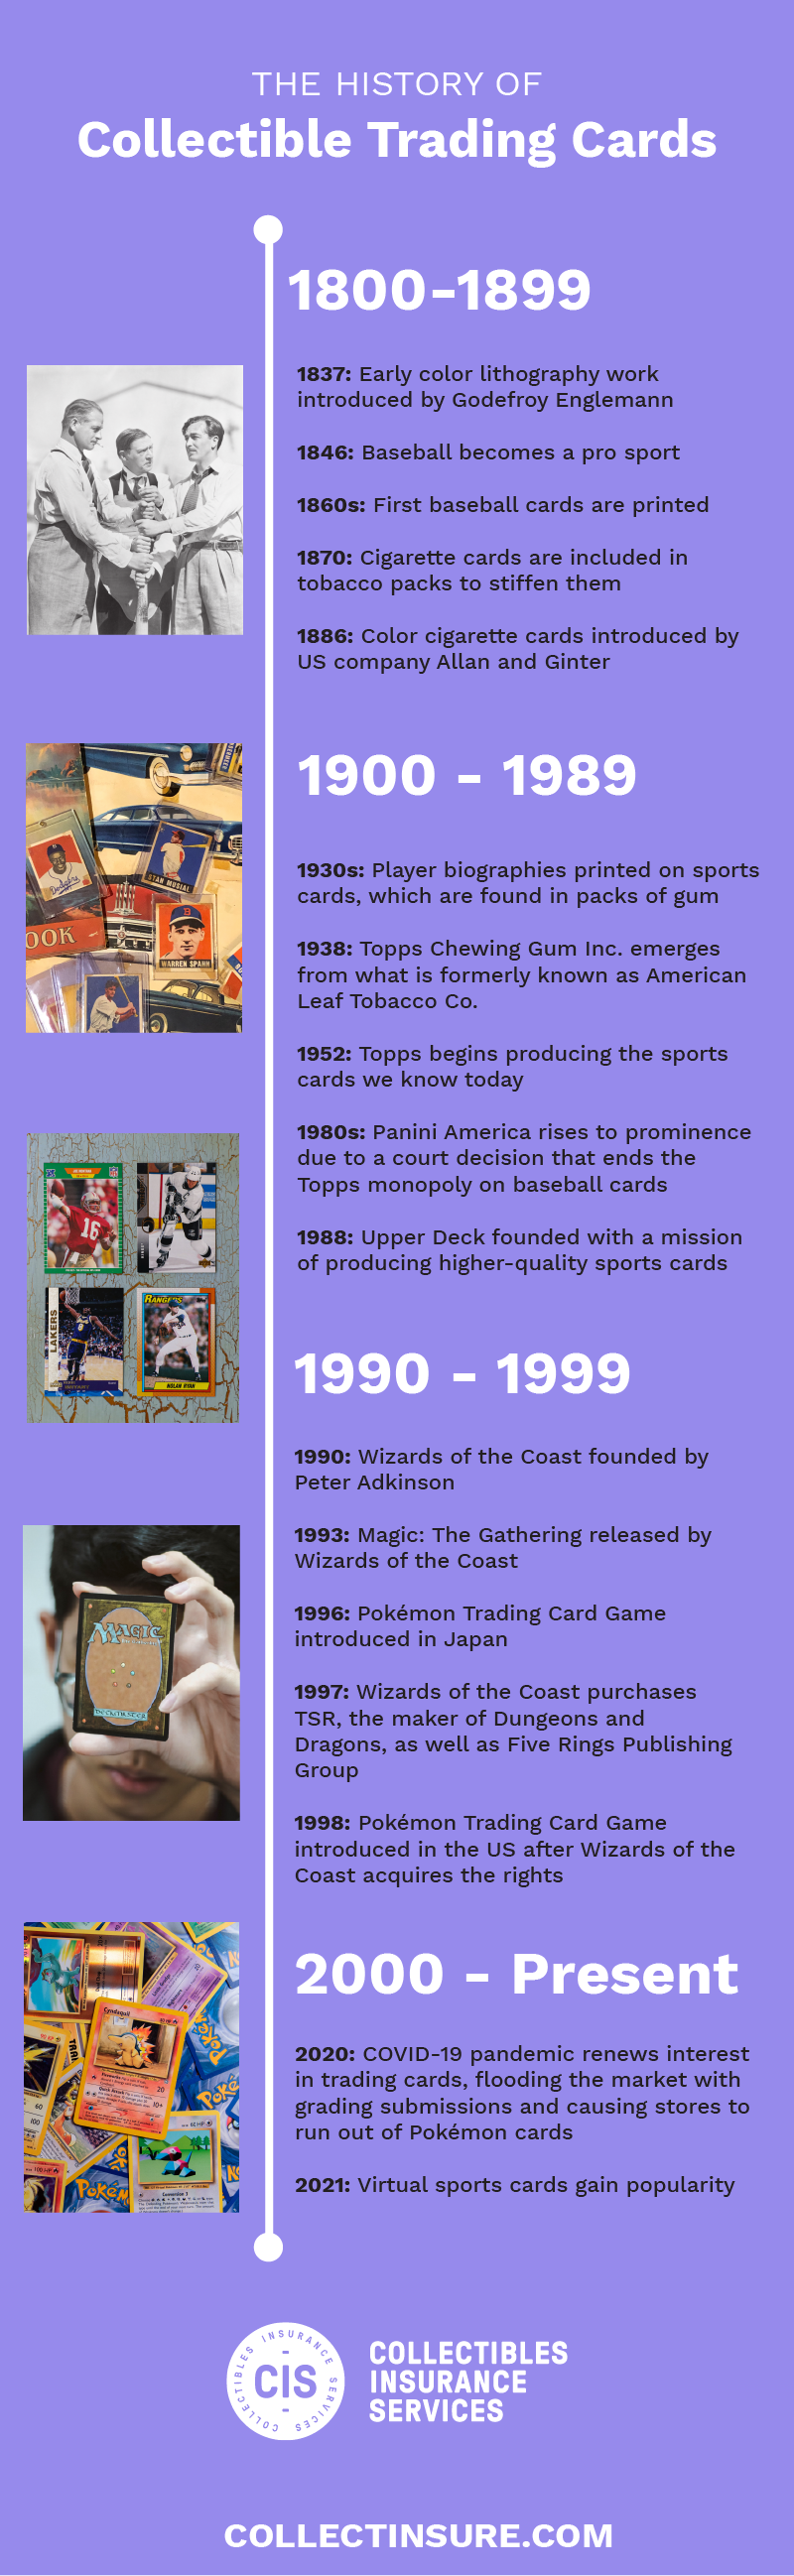 The History of Collectible Trading Cards - Collectibles Insurance Services